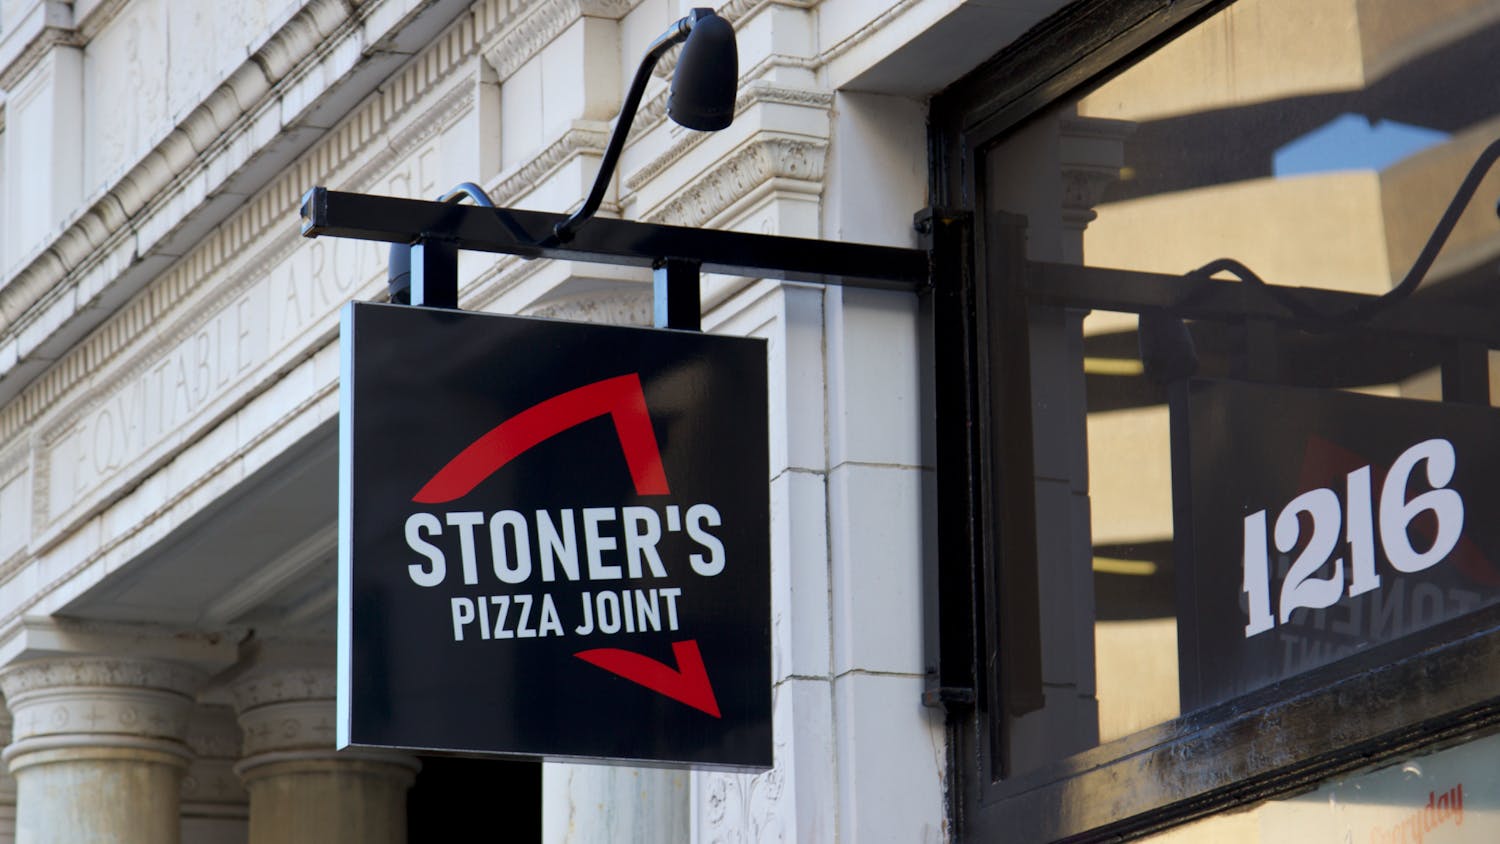 A close of up Stoner's Pizza Joint's sign outside its 1216 Washington St. location in Columbia, SC.